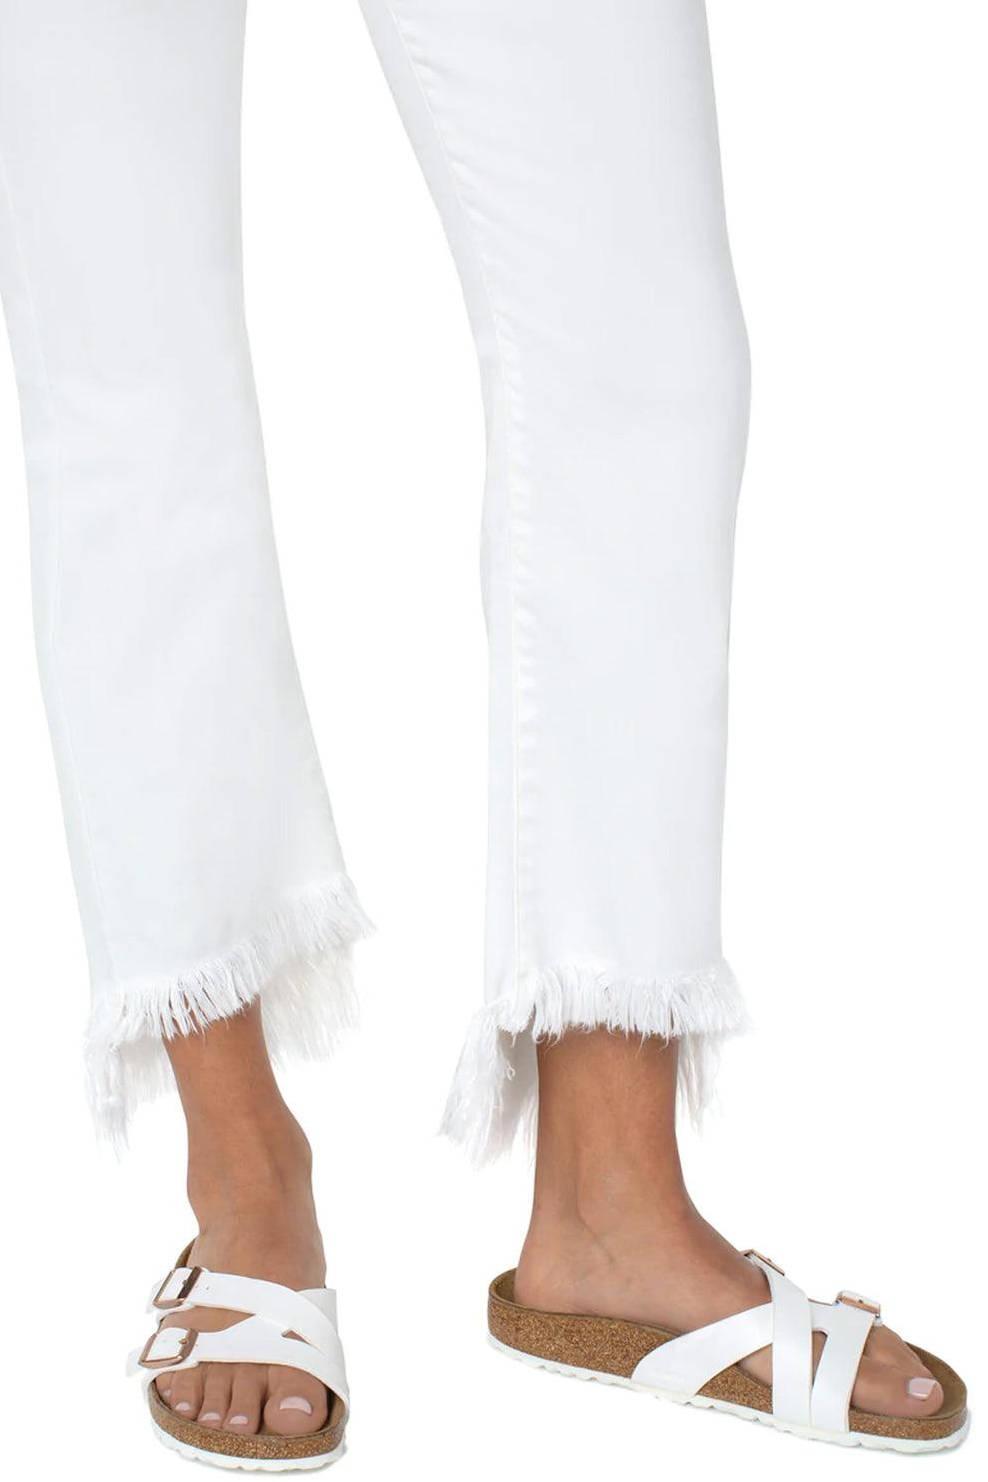 Liverpool White Crop Flare Hem Jeans - Strawberry Moon Boutique